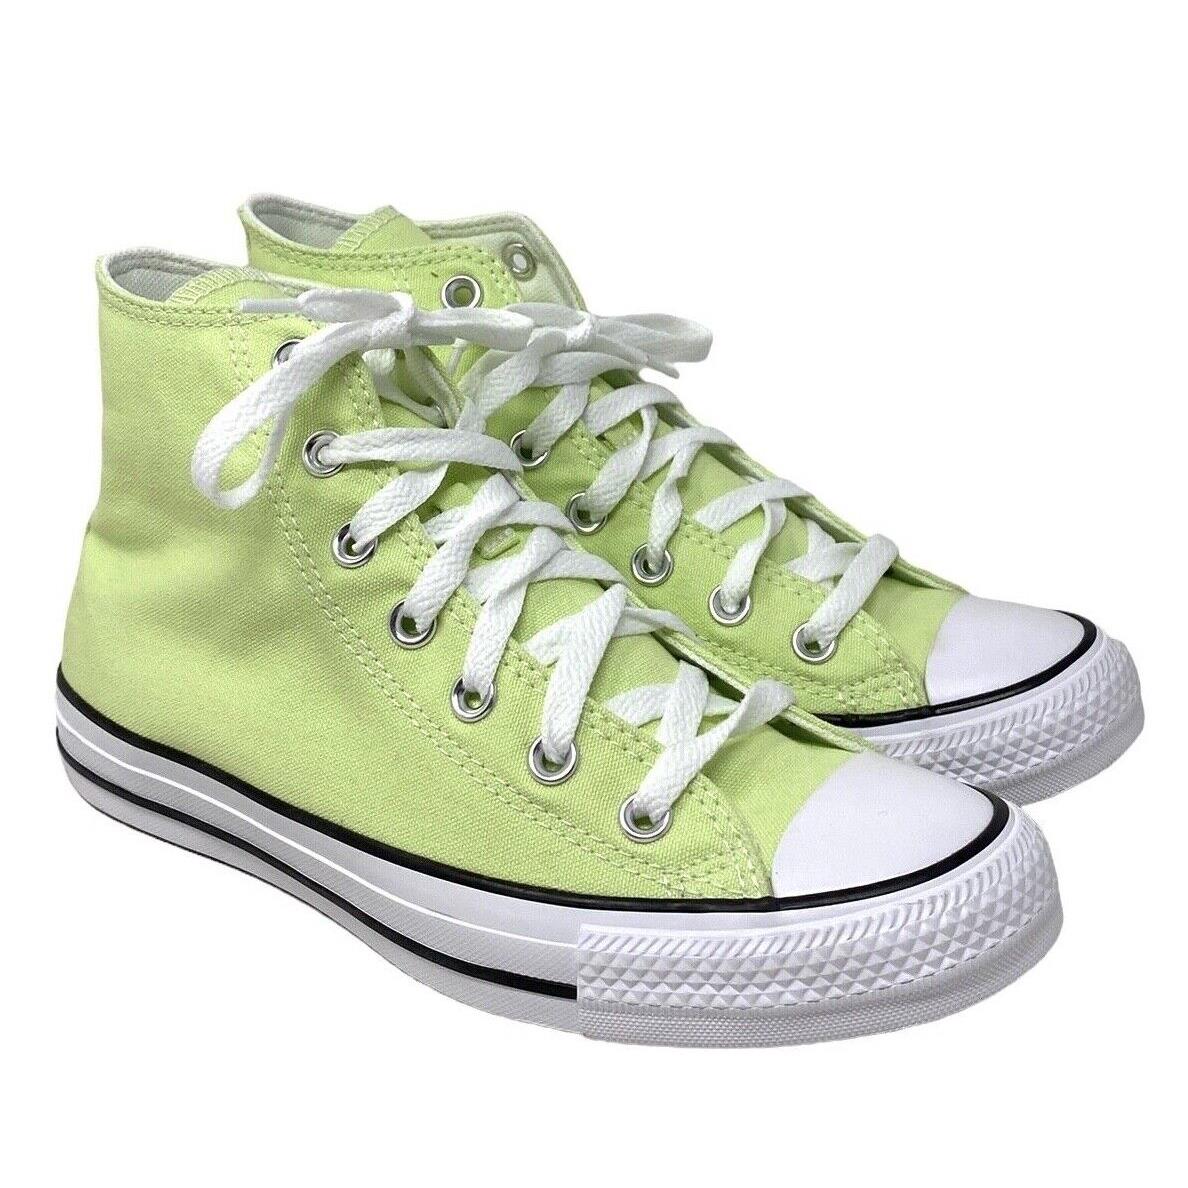 Converse Chuck Taylor High Top Skate Shoes For Men Melon Canvas Sneakers A03422F